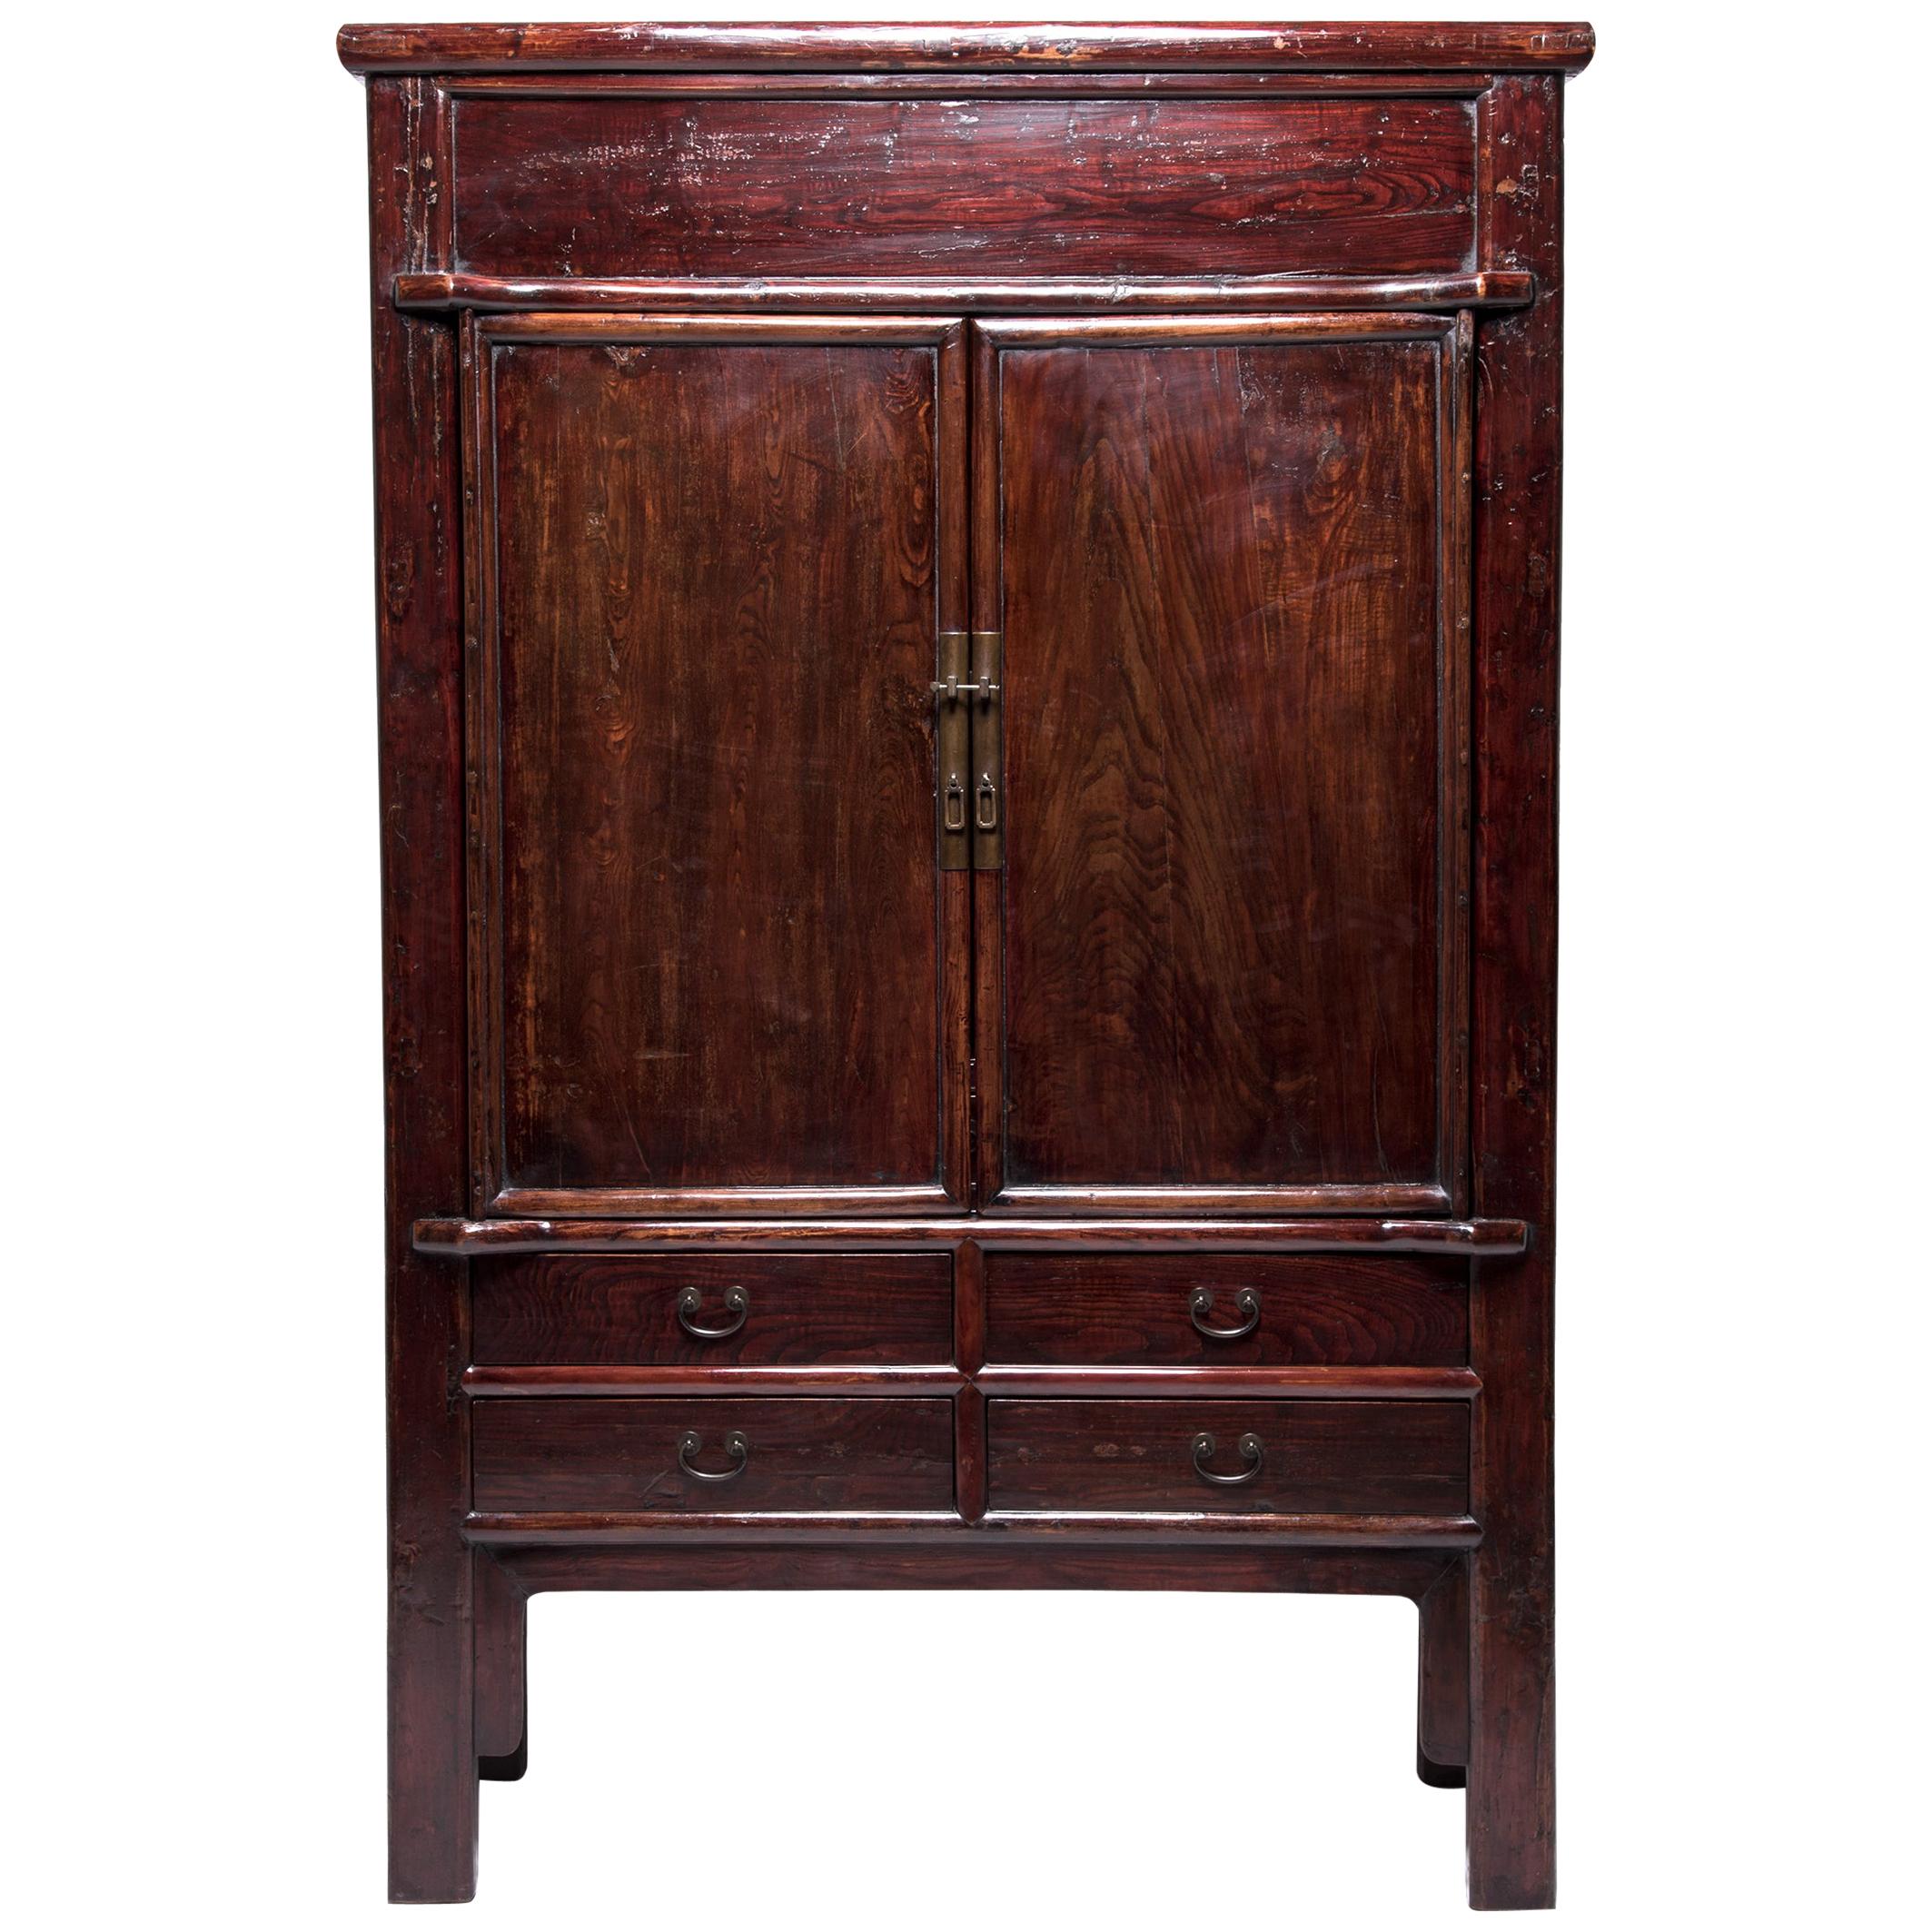 Grand Chinese Two-Door Cabinet, c. 1800